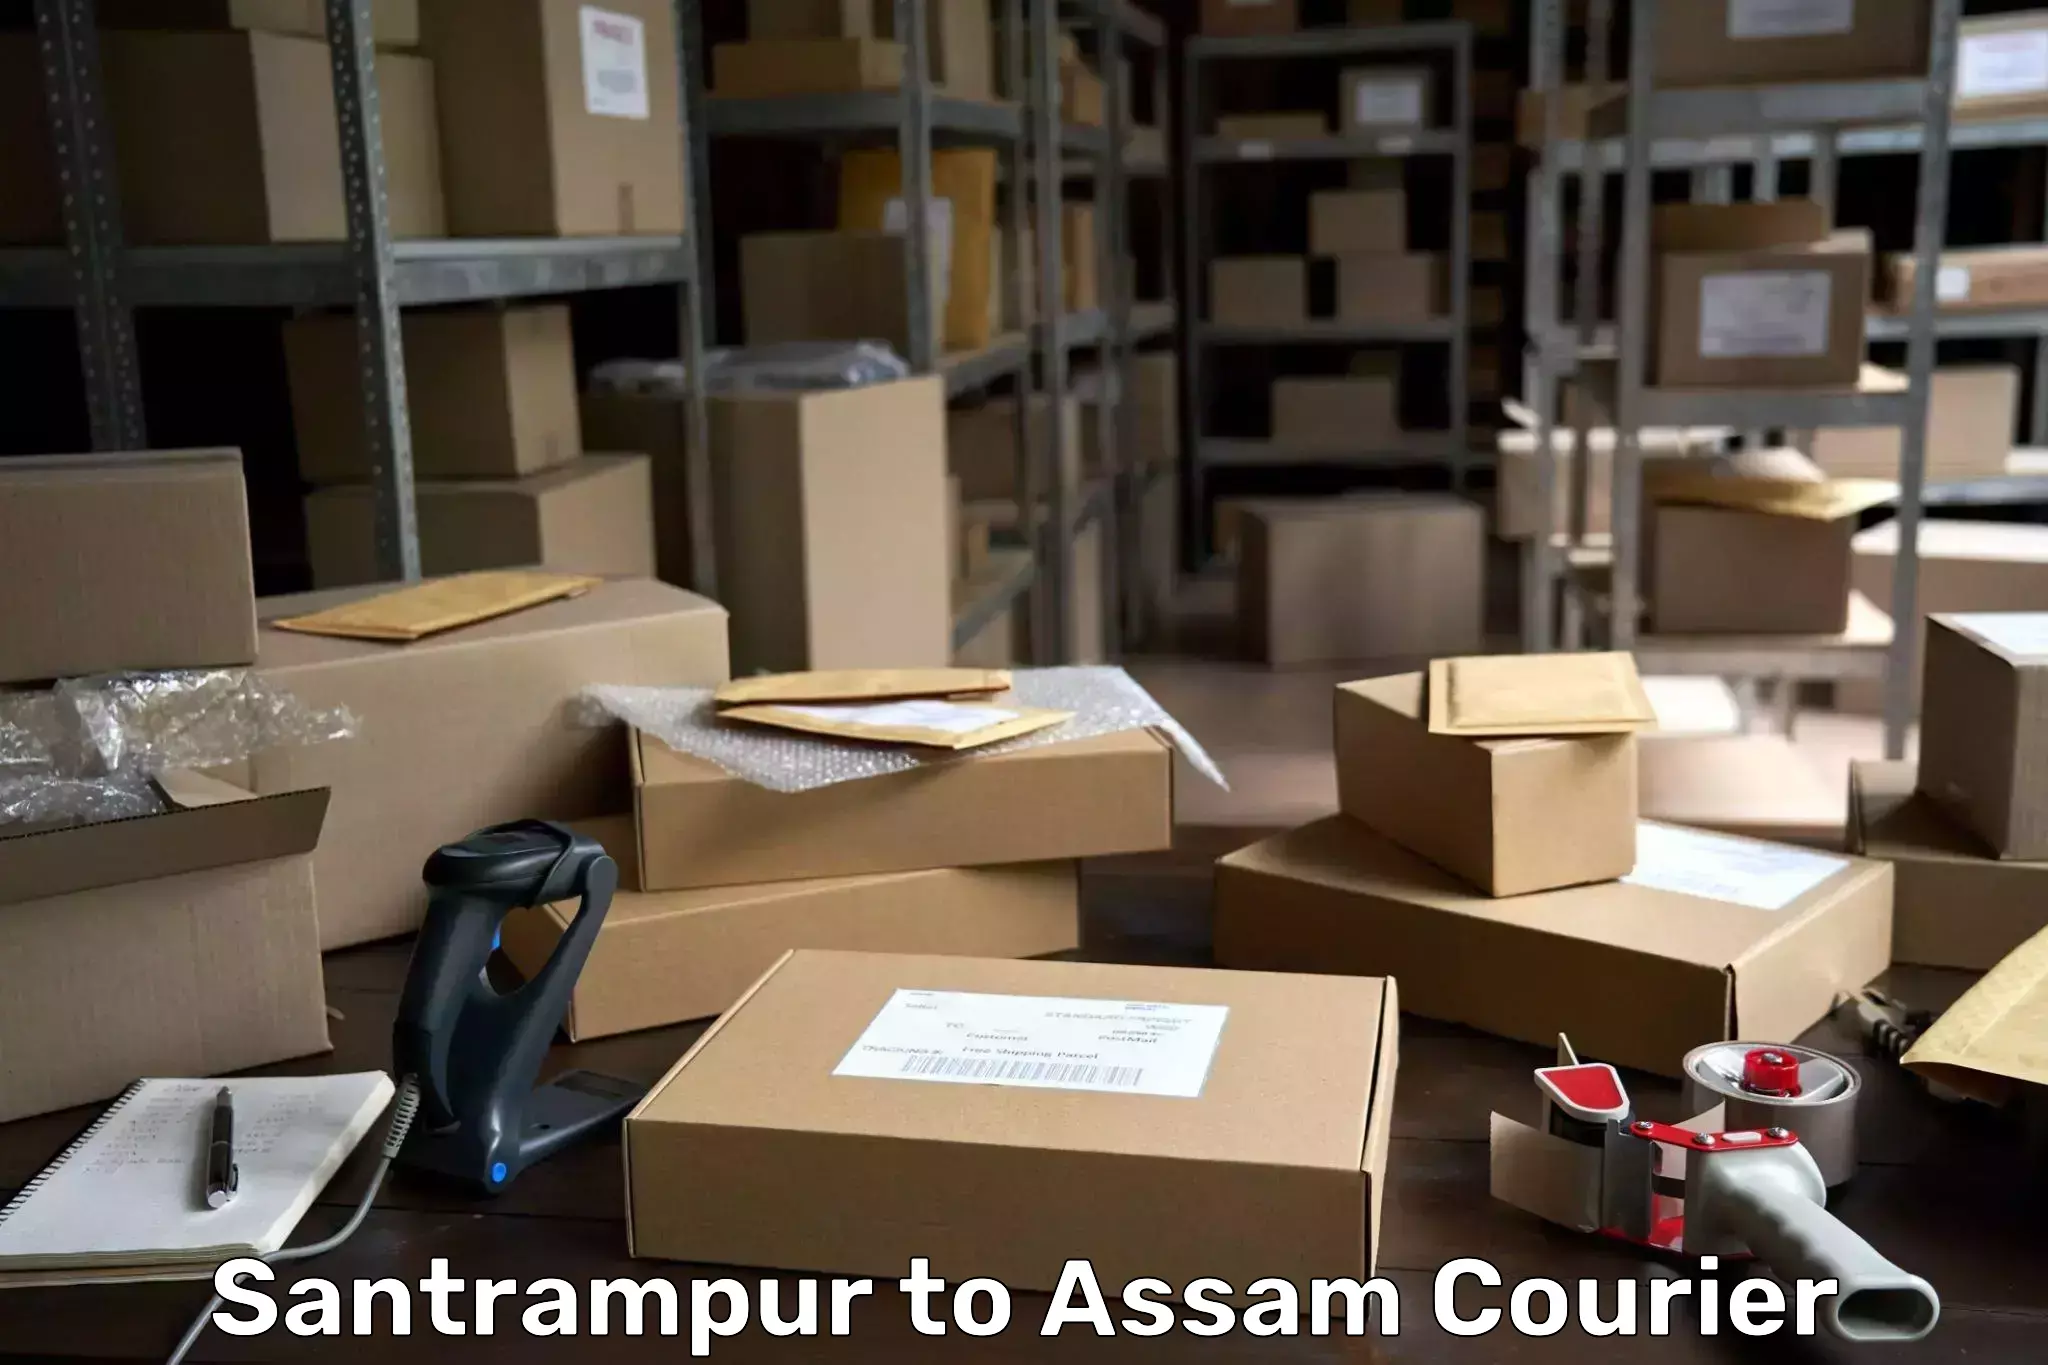 Quality courier partnerships in Santrampur to Tezpur University